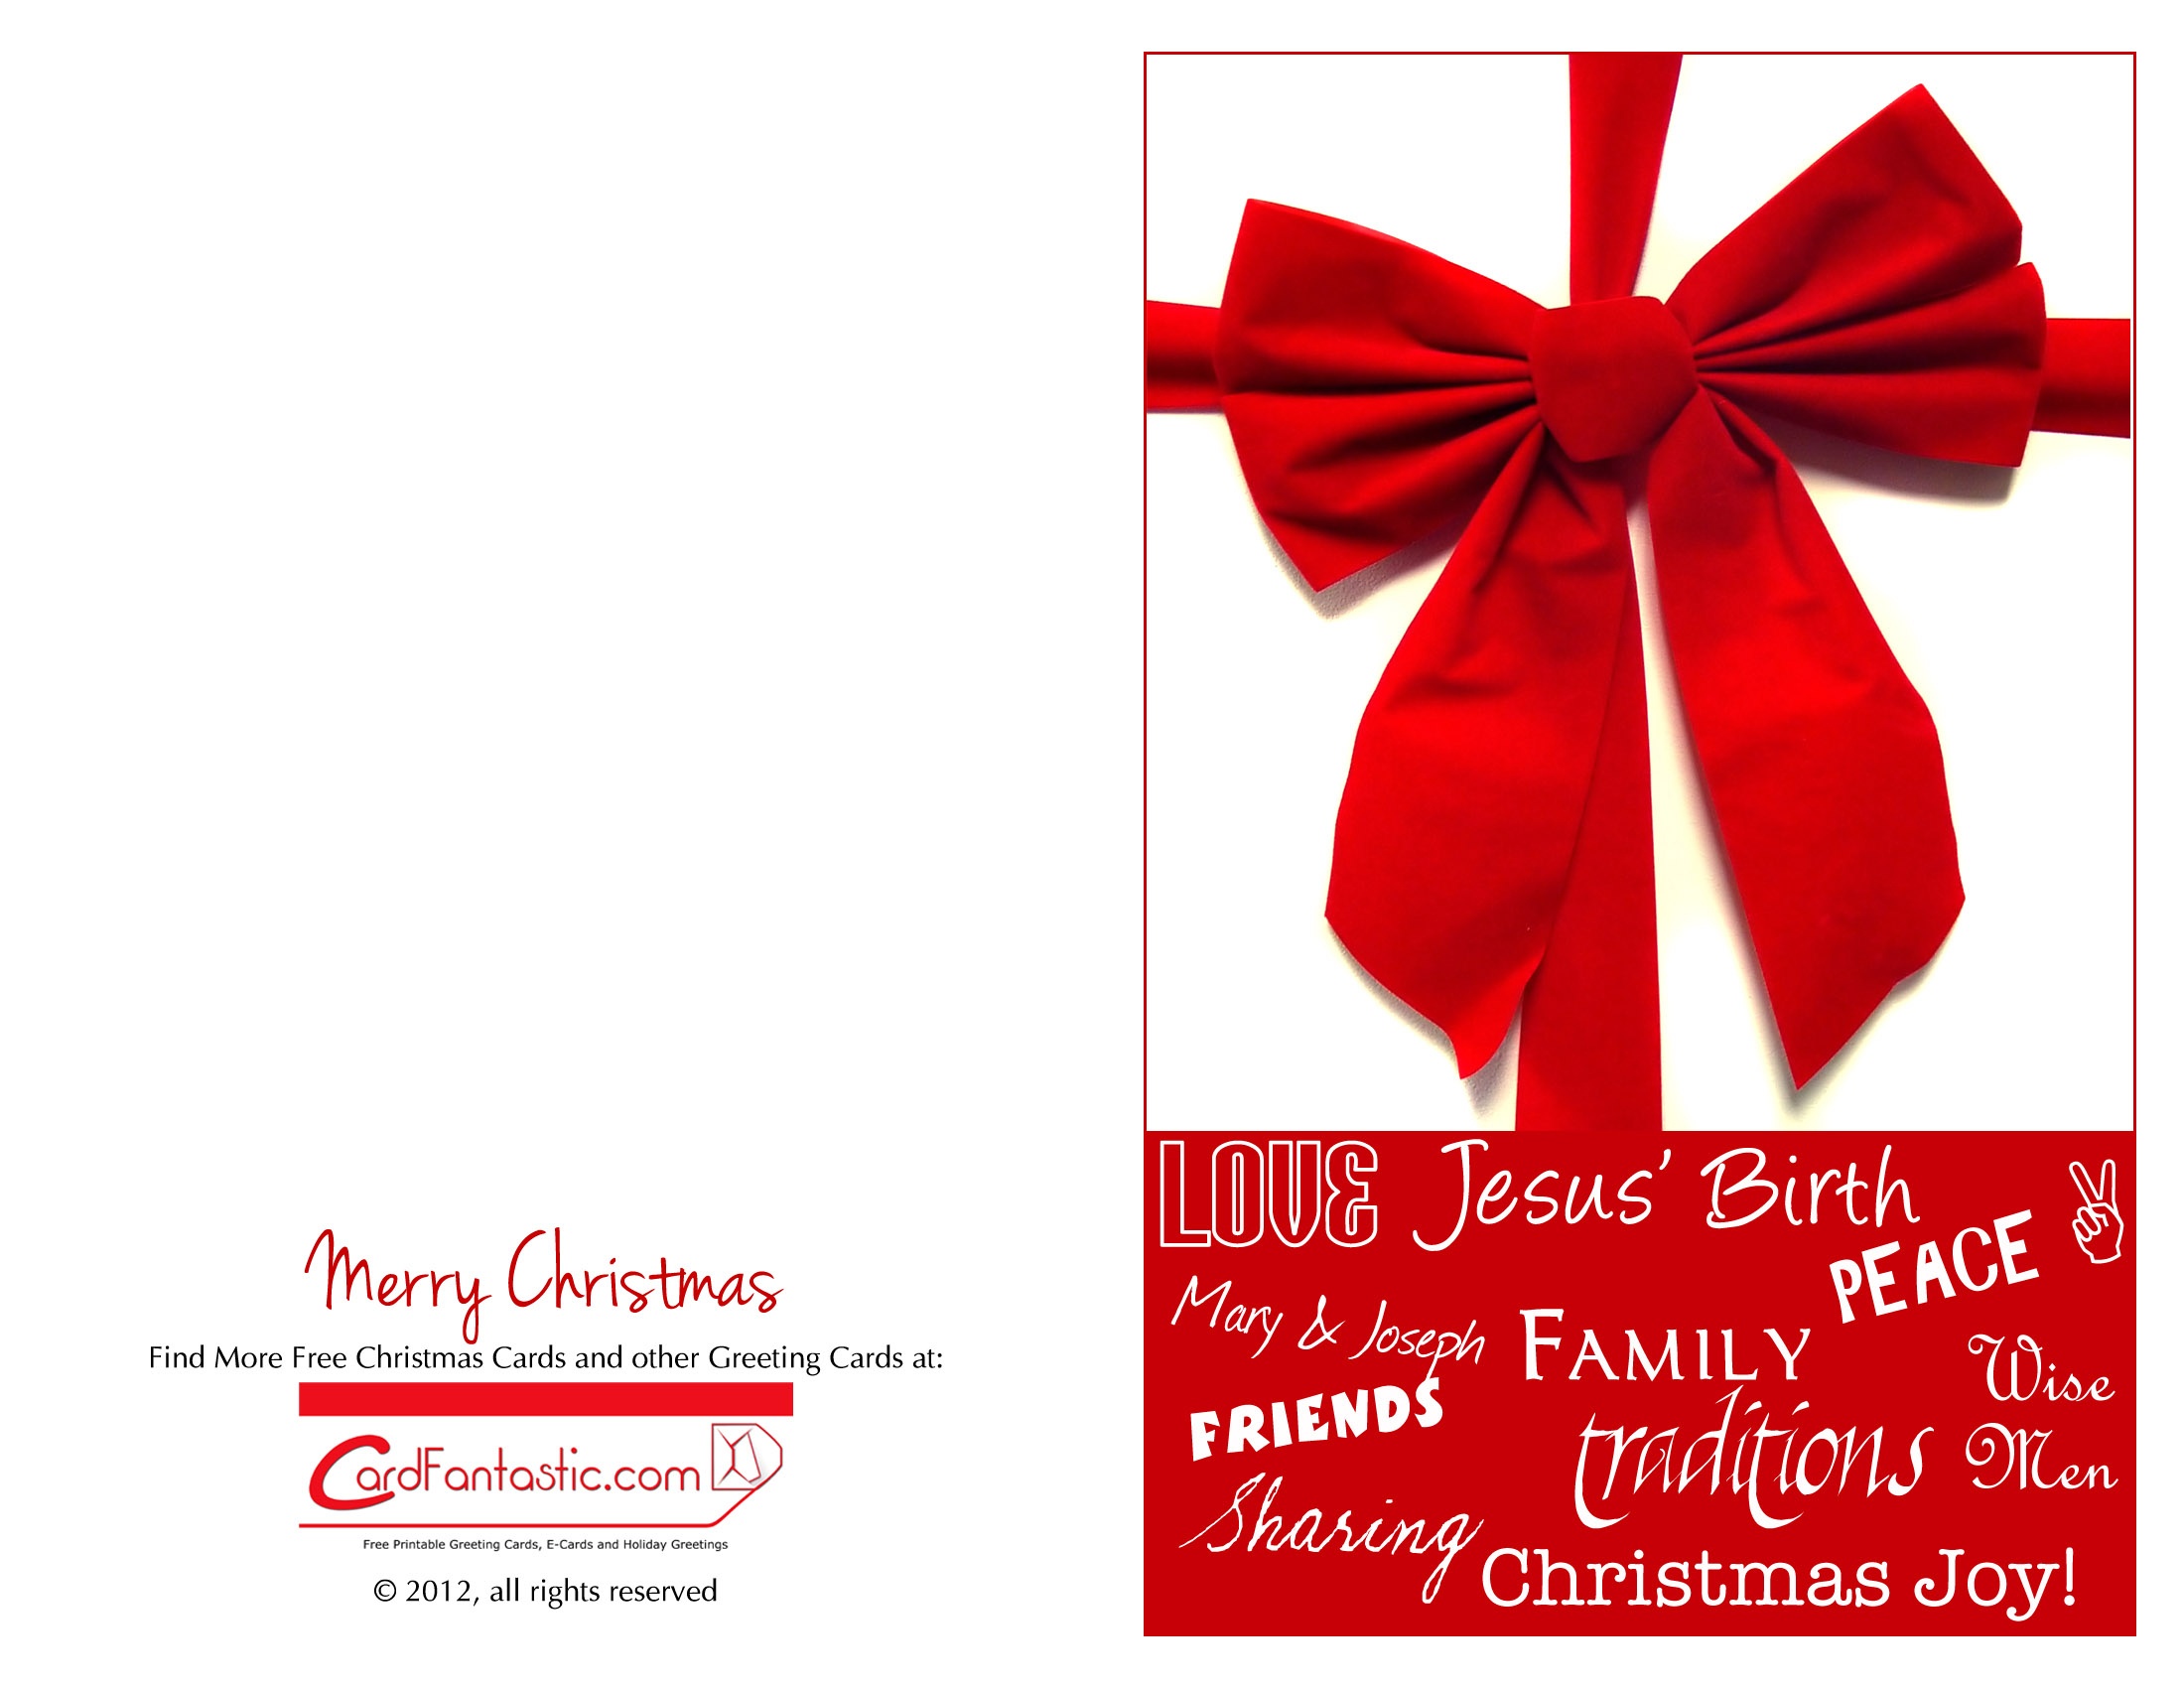 Chirstmas Cards - Download Free Greeting Cards And E-Cards - Christmas Cards Download Free Printable